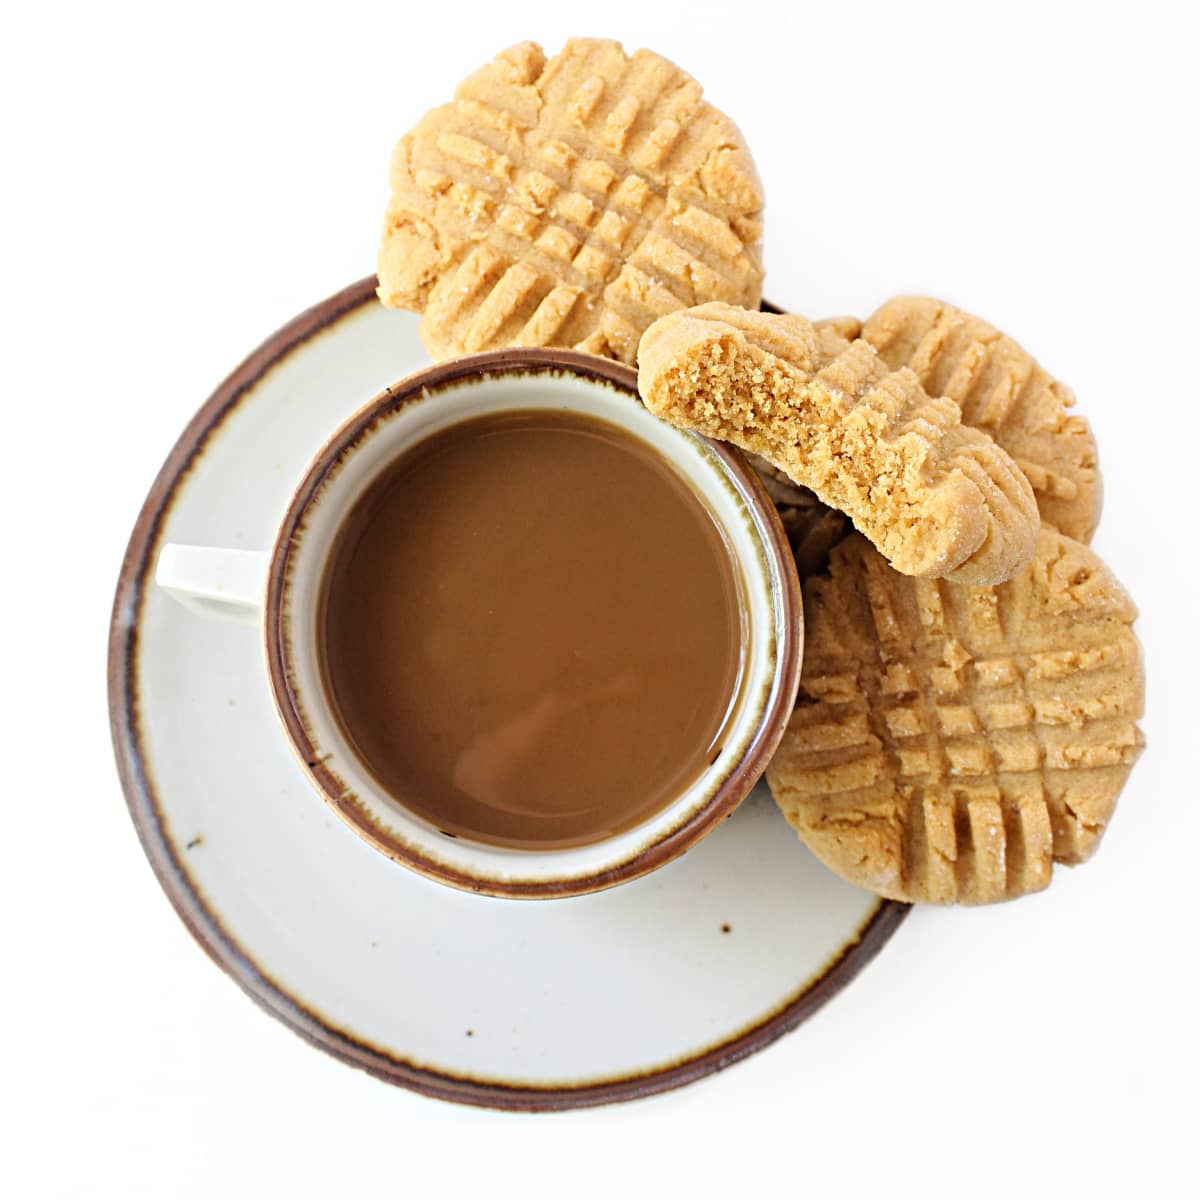 Coffee cup with peanut butter cookies on the saucer with one cookie showing interior crumb.